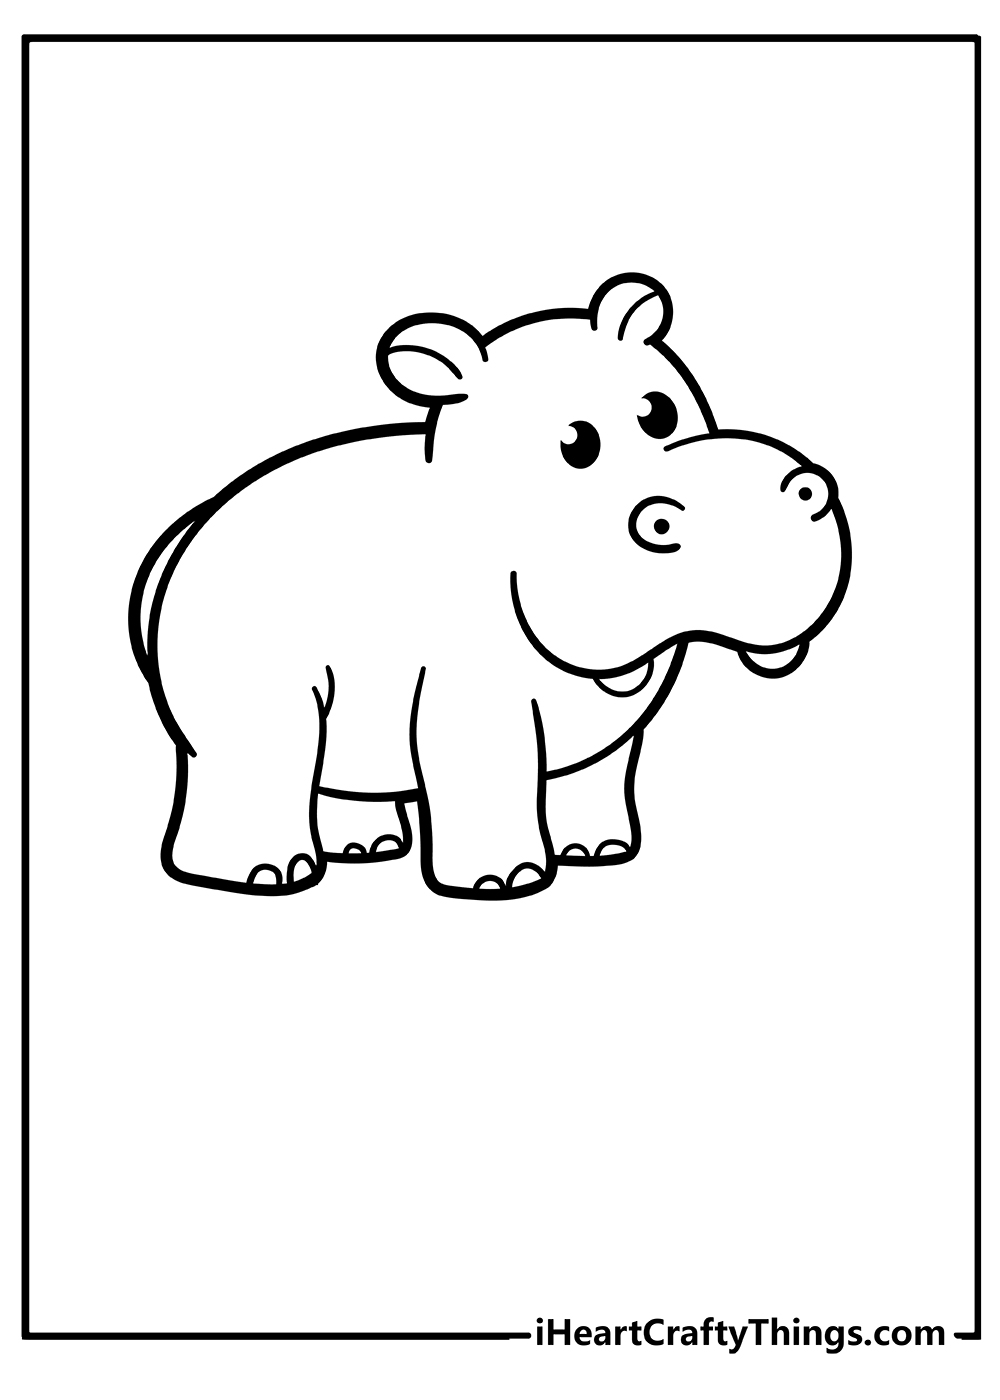 Hippo Coloring Pages free pdf download